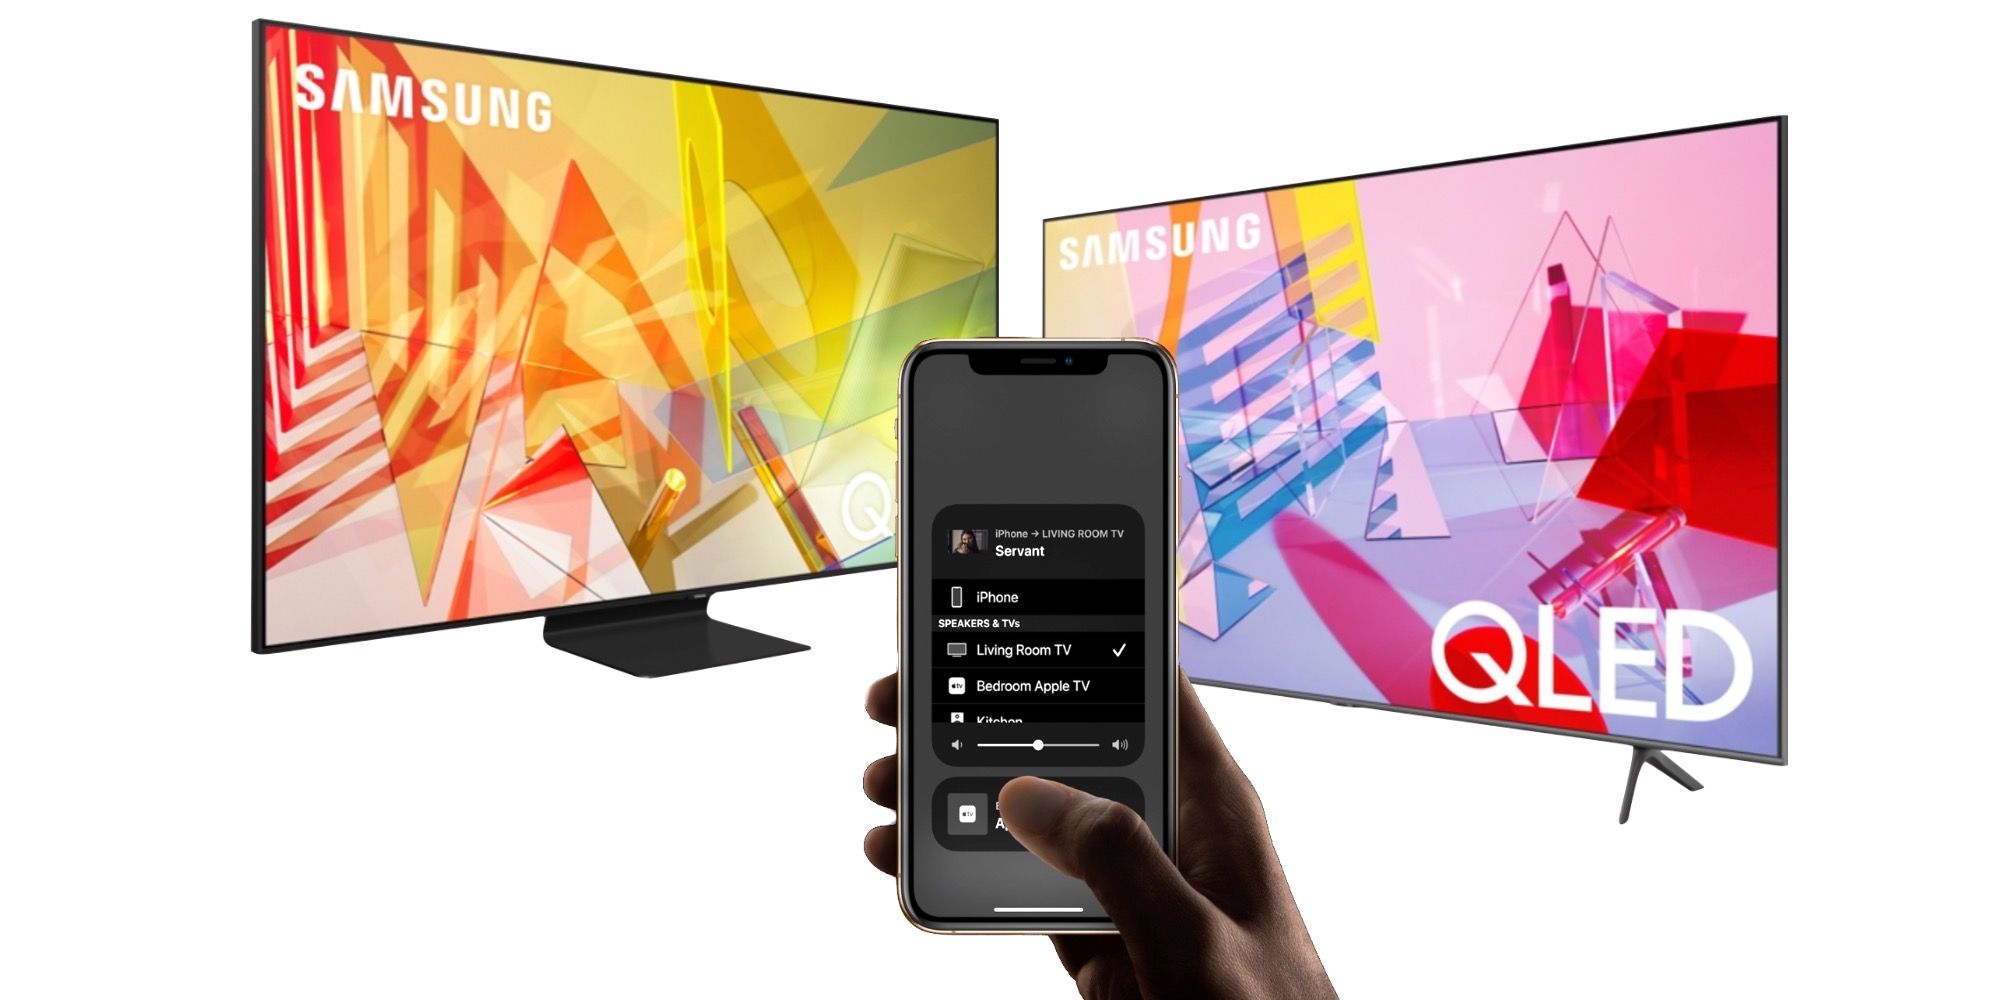 Samsung Smart TVs Compatible With AirPlay 2 For Streaming From iPhone